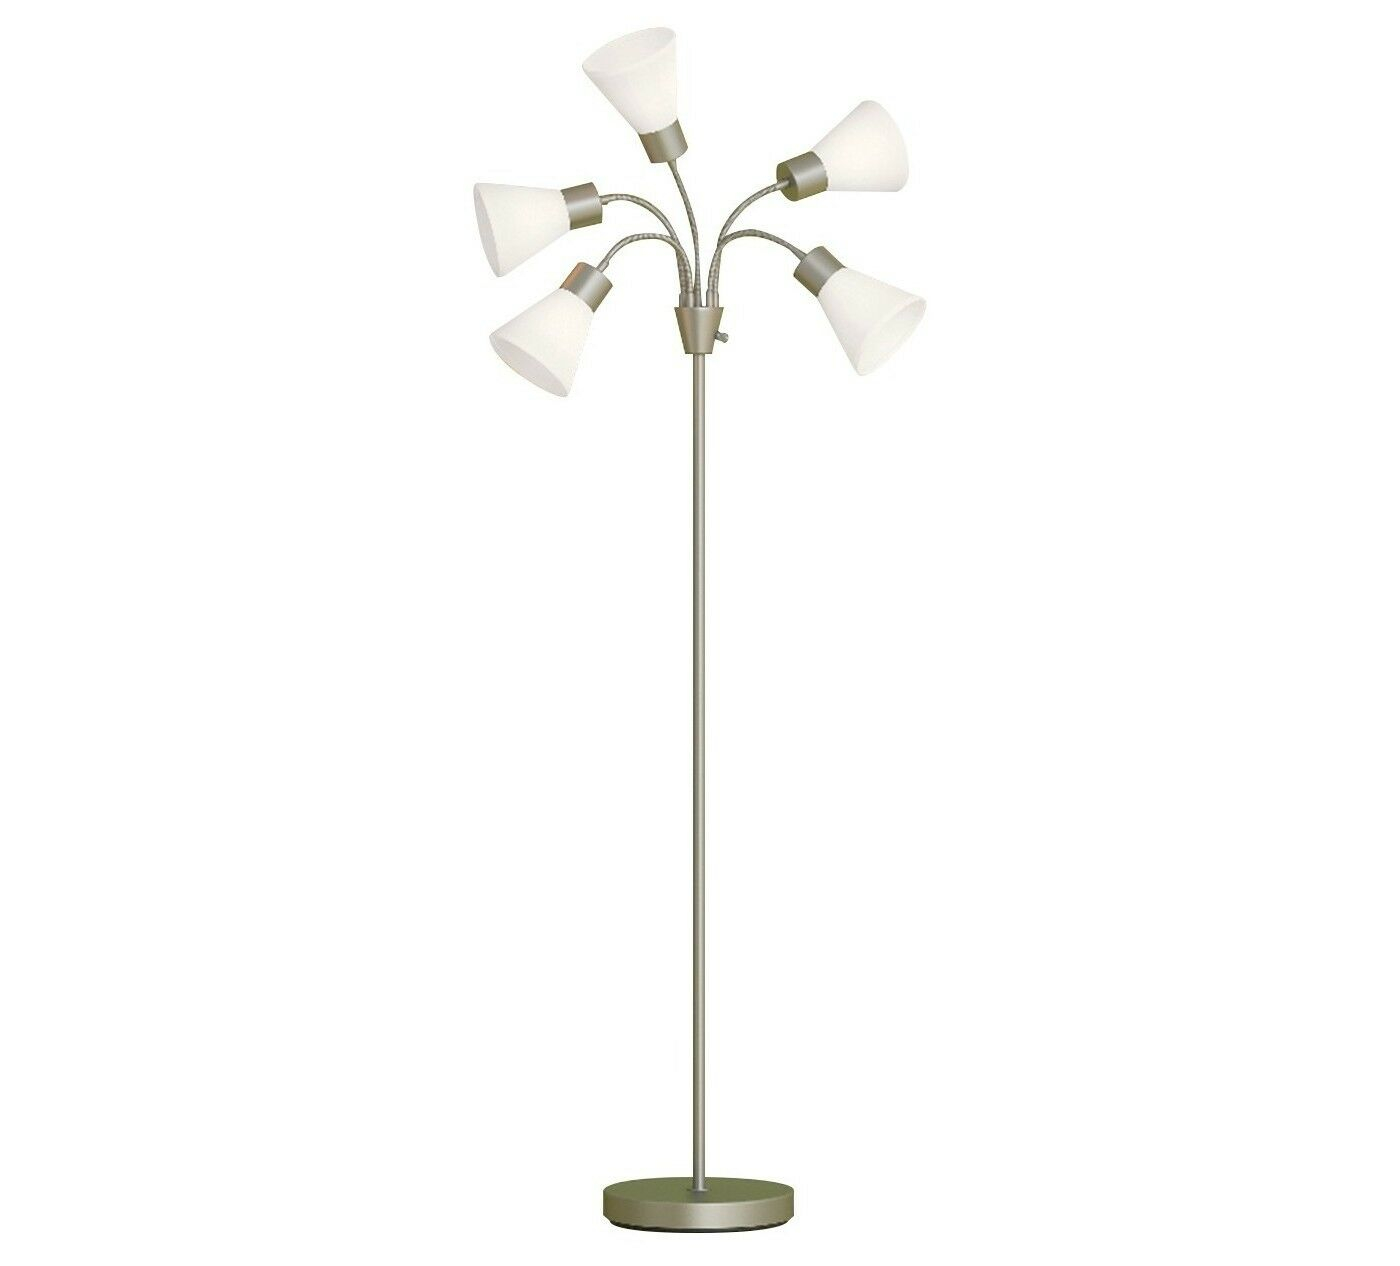 Details About Bright Light Dorm Room Essentials 5 Head Tall Floor Lamp Flexible Gooseneck Arms intended for proportions 1400 X 1266